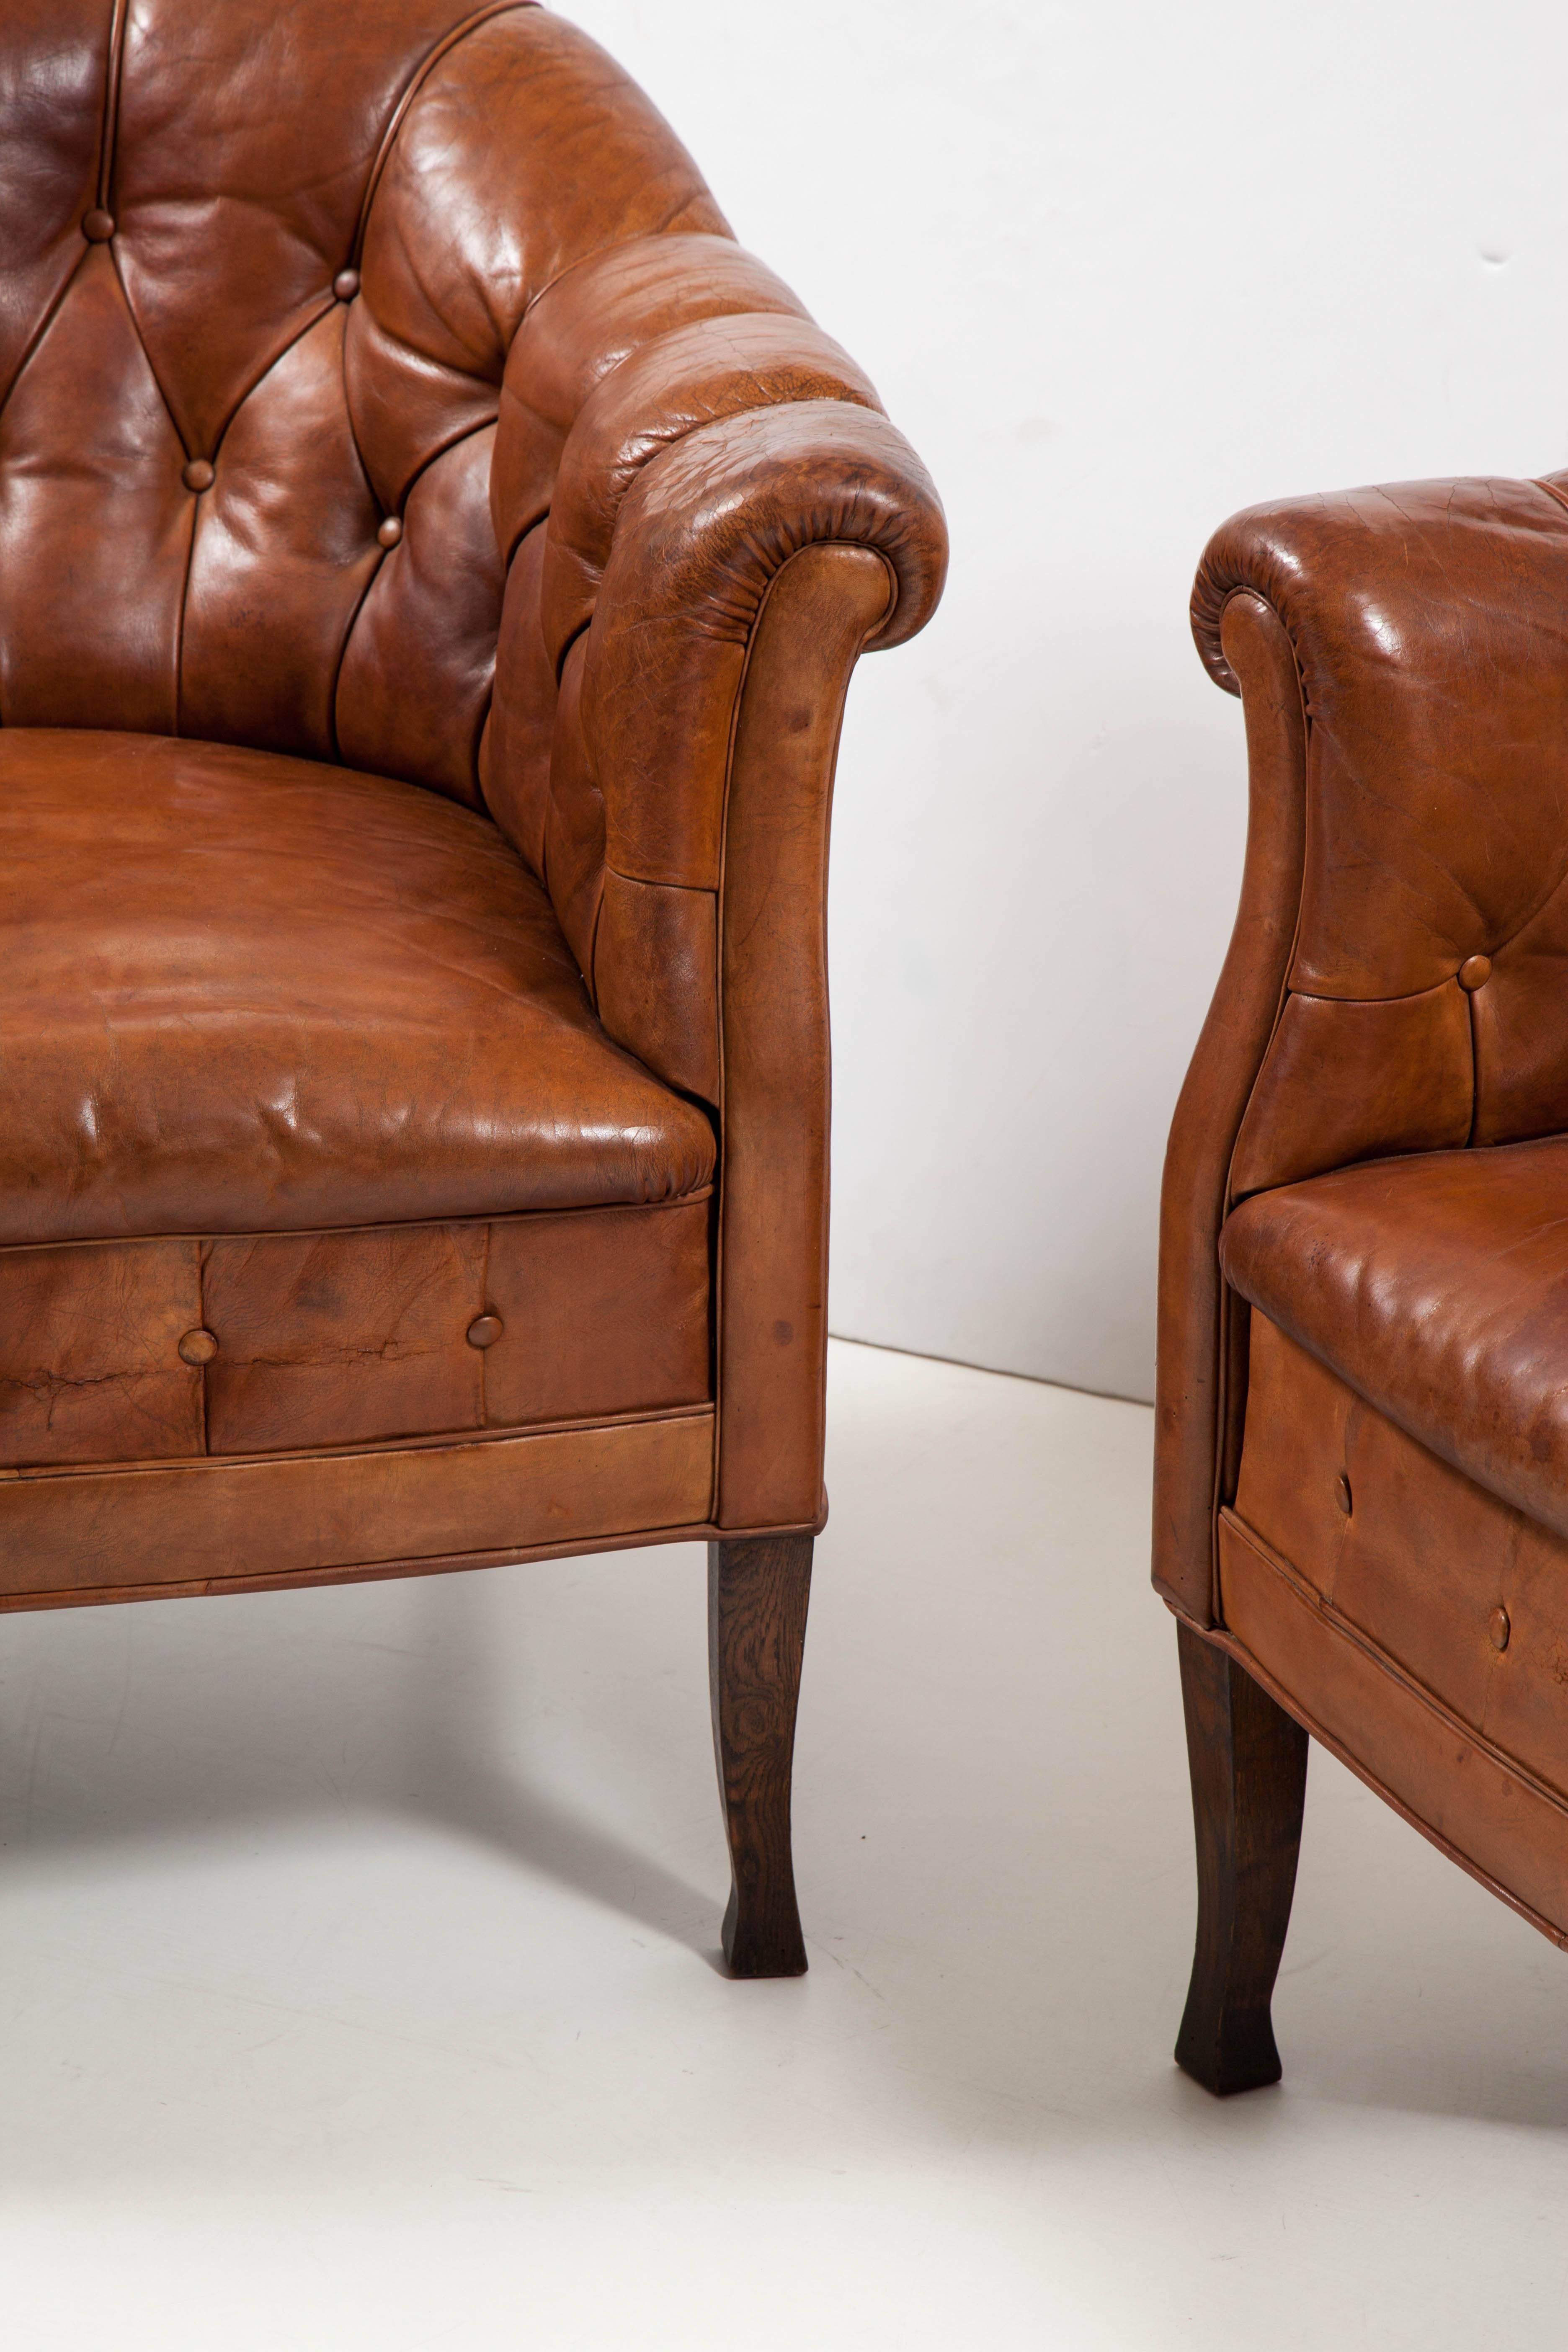 A pair of Swedish tufted leather club chairs, circa 1910-20, of tub back form with scrolled armrest raised on stained beech legs.
Fantastic patina, sit very comfortably. Leather is supple not dry but has old cracks. A few minor repaired holes but